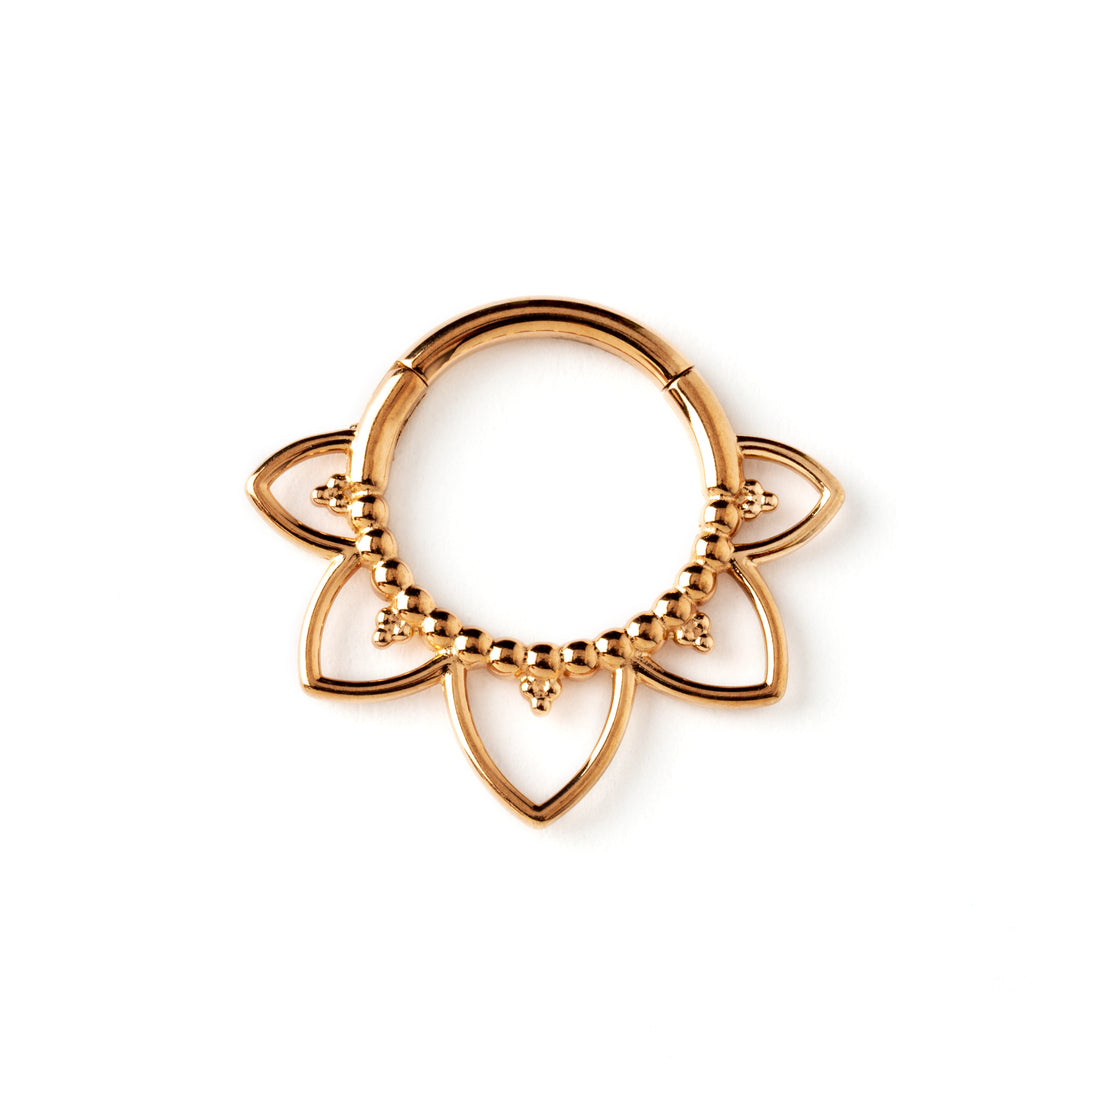 Iryia  rose gold surgical steel open lotus septum clickers frontal view